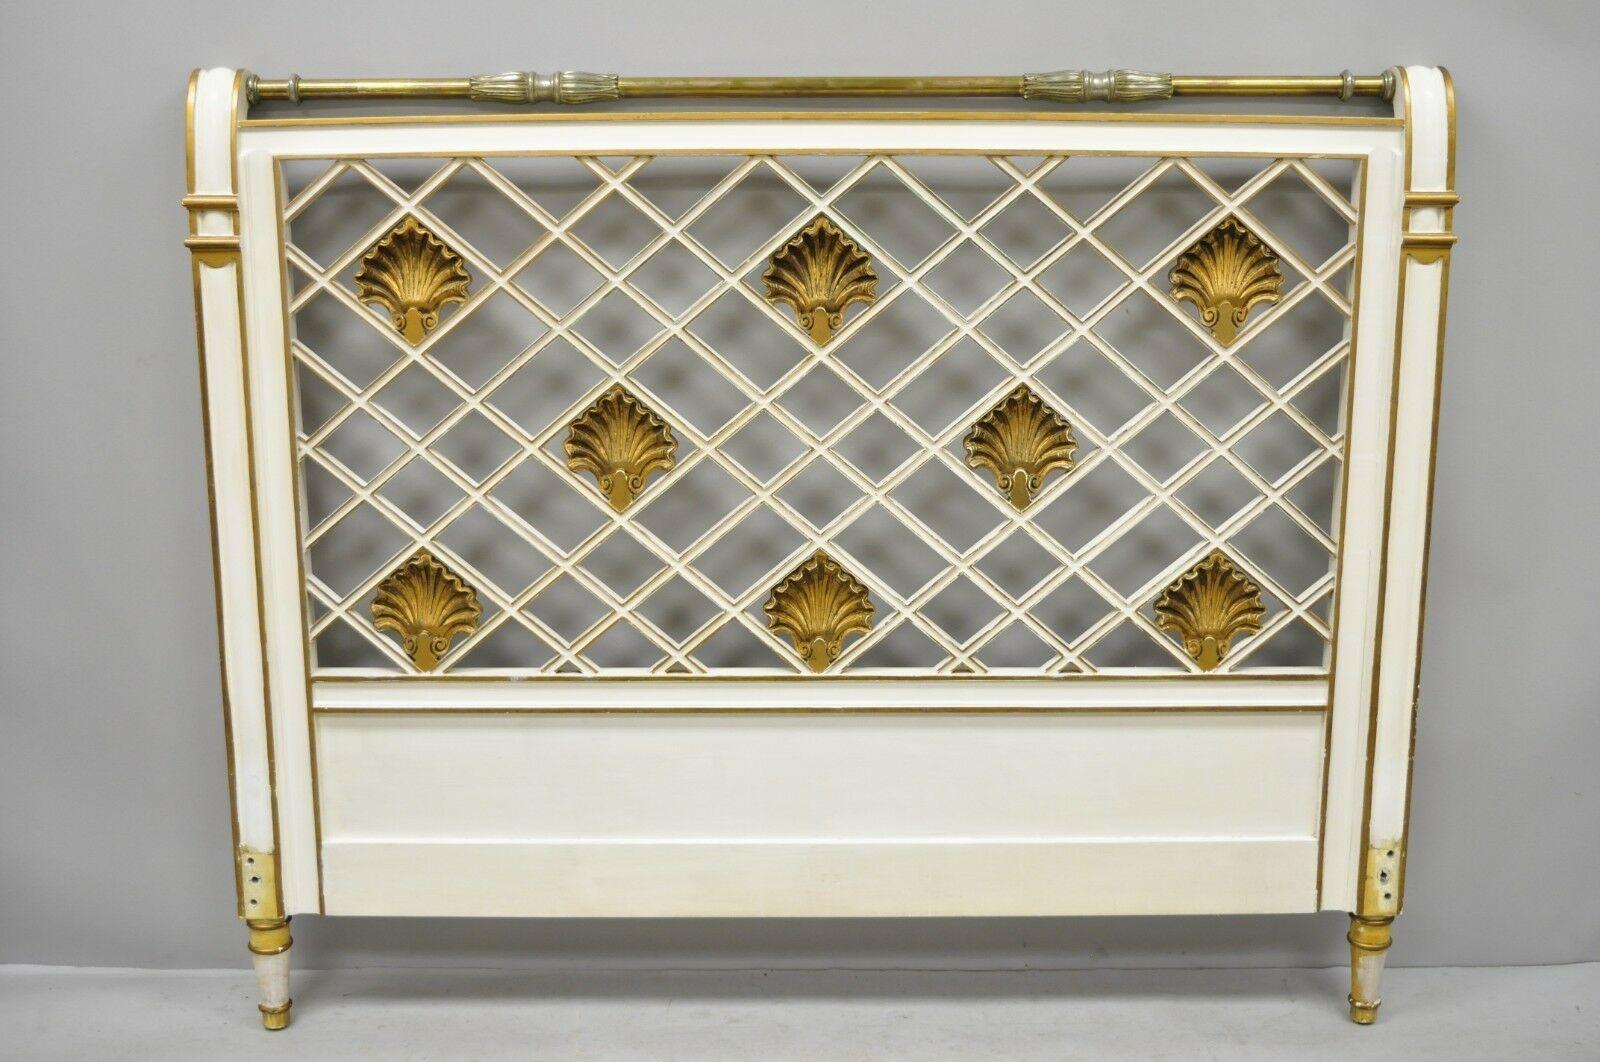 French Neoclassical Style Italian Shell Carve Lattice Queen Size Bed Headboard 5